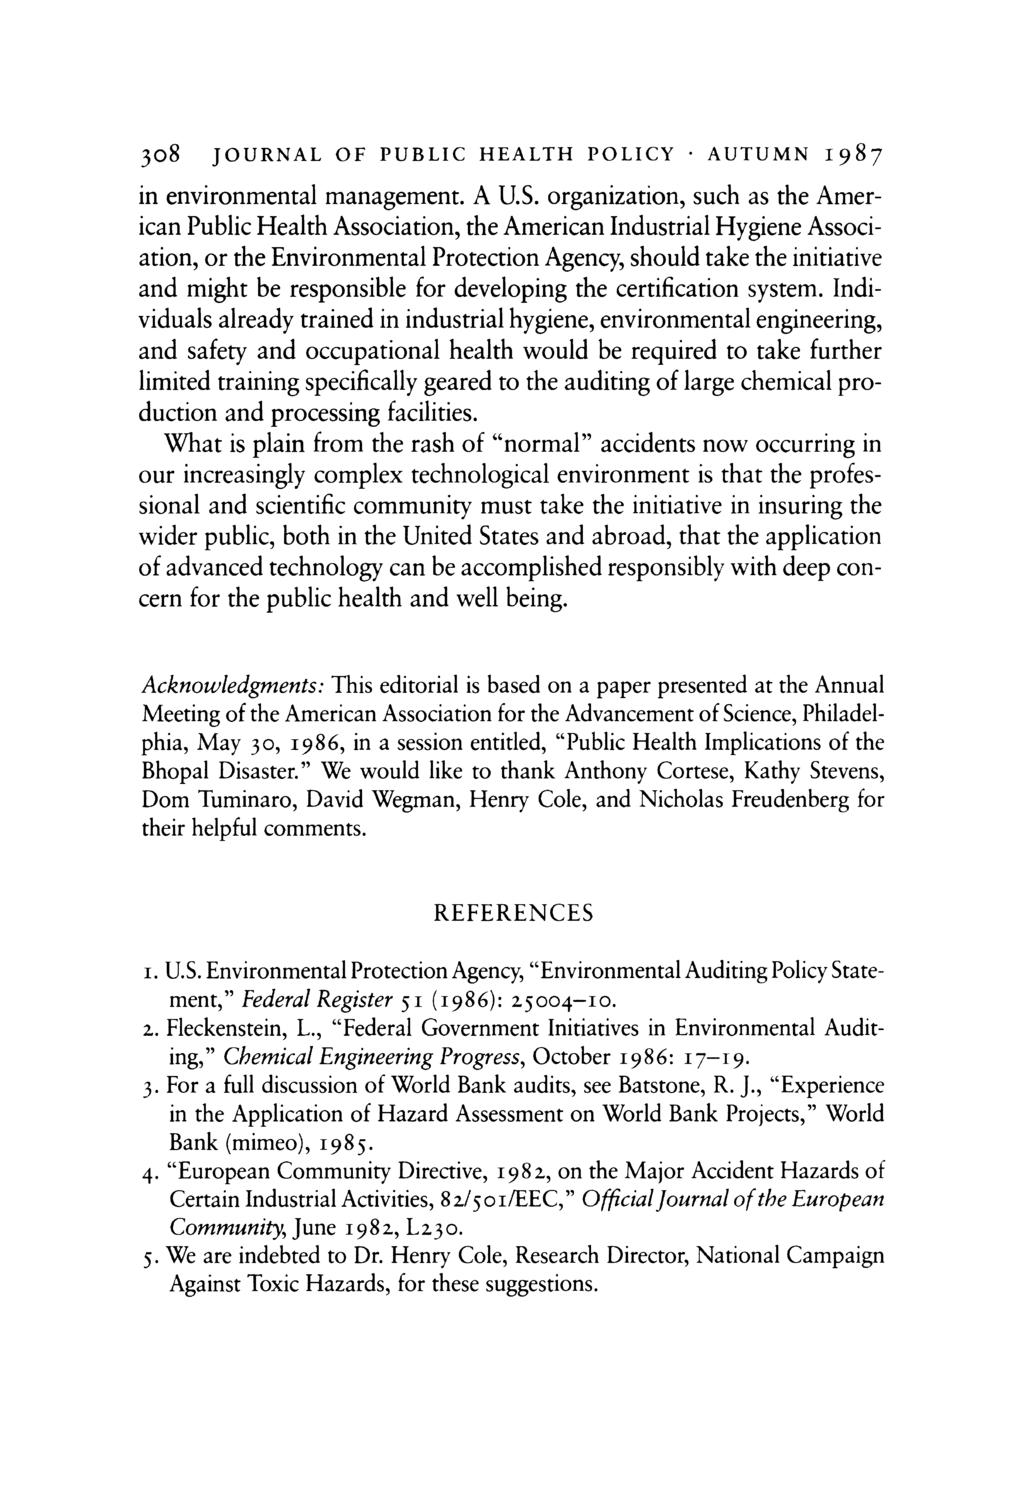 308 JOURNAL OF PUBLIC HEALTH POLICY * AUTUMN I987 in environmental management. A U.S.